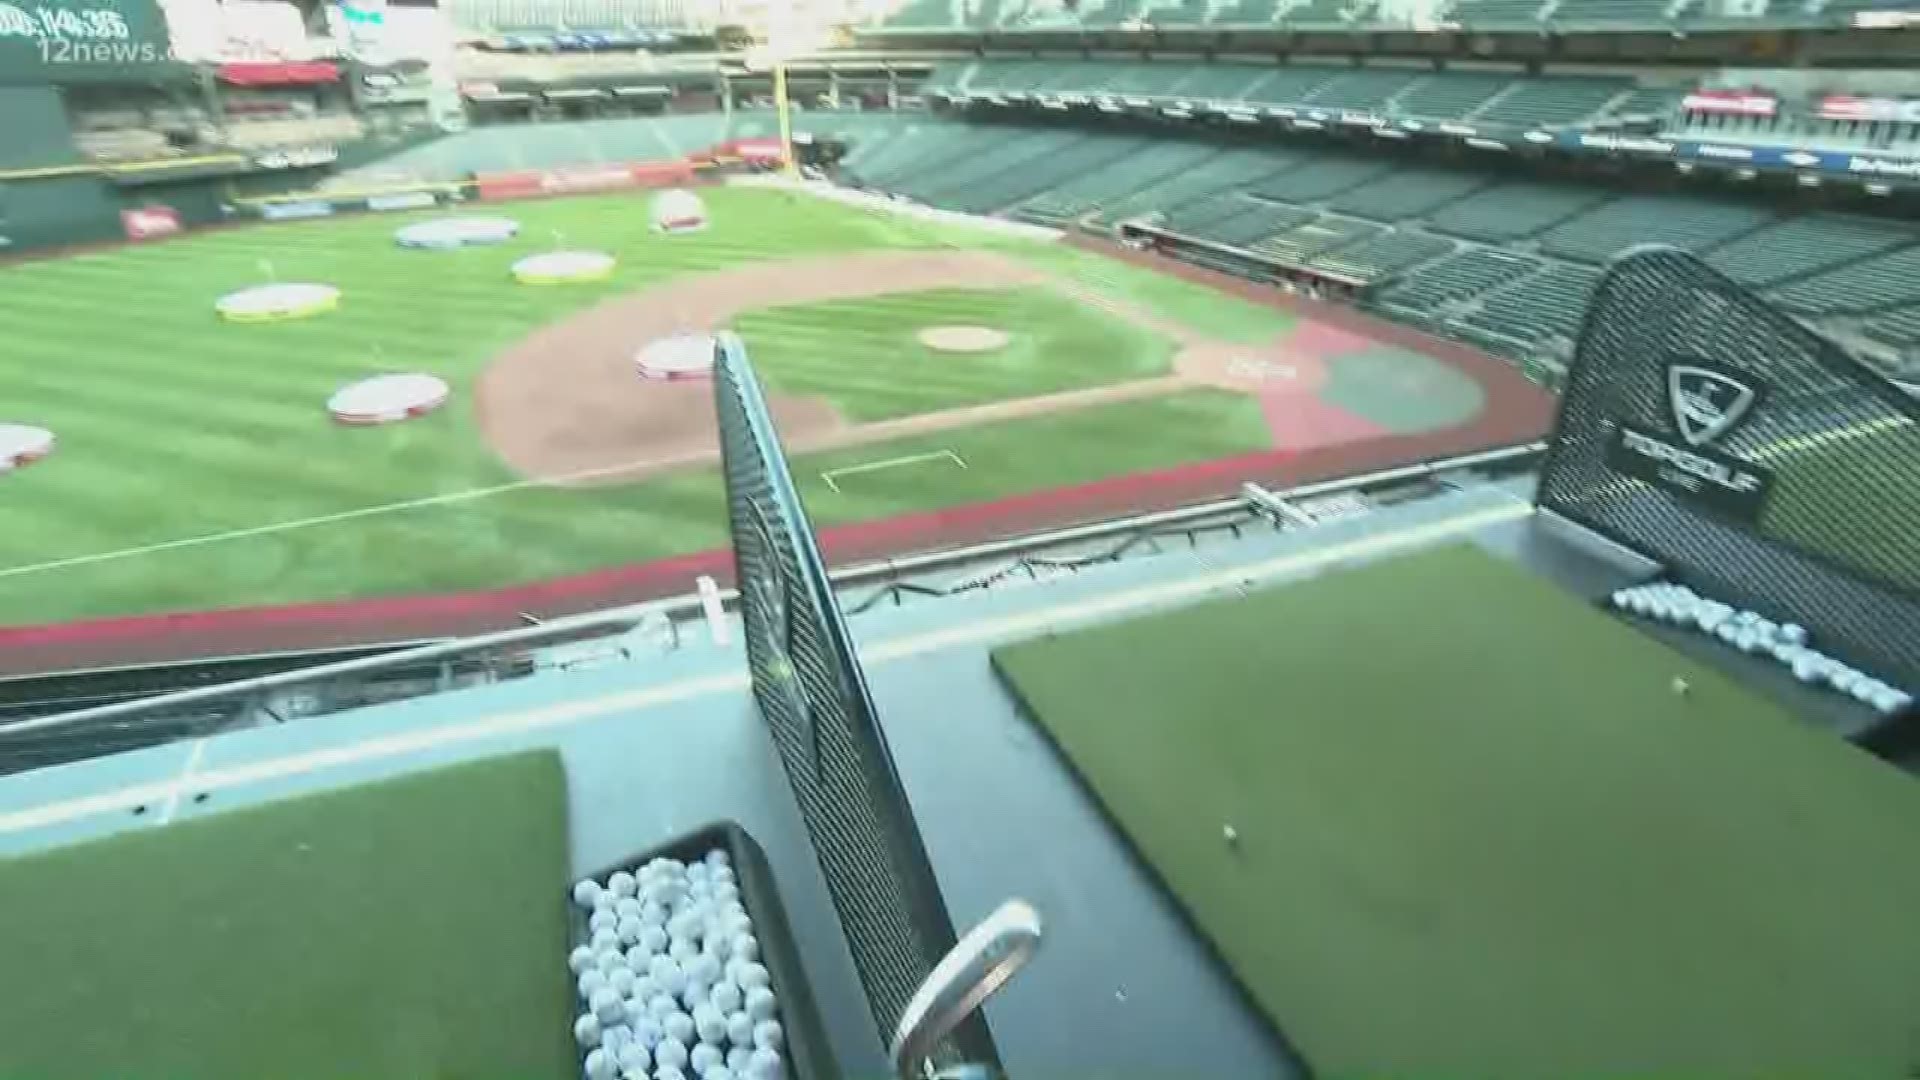 Chase Field was transformed into a driving range with Topgolf Live. Hit balls into the outfield in this fun, limited event.